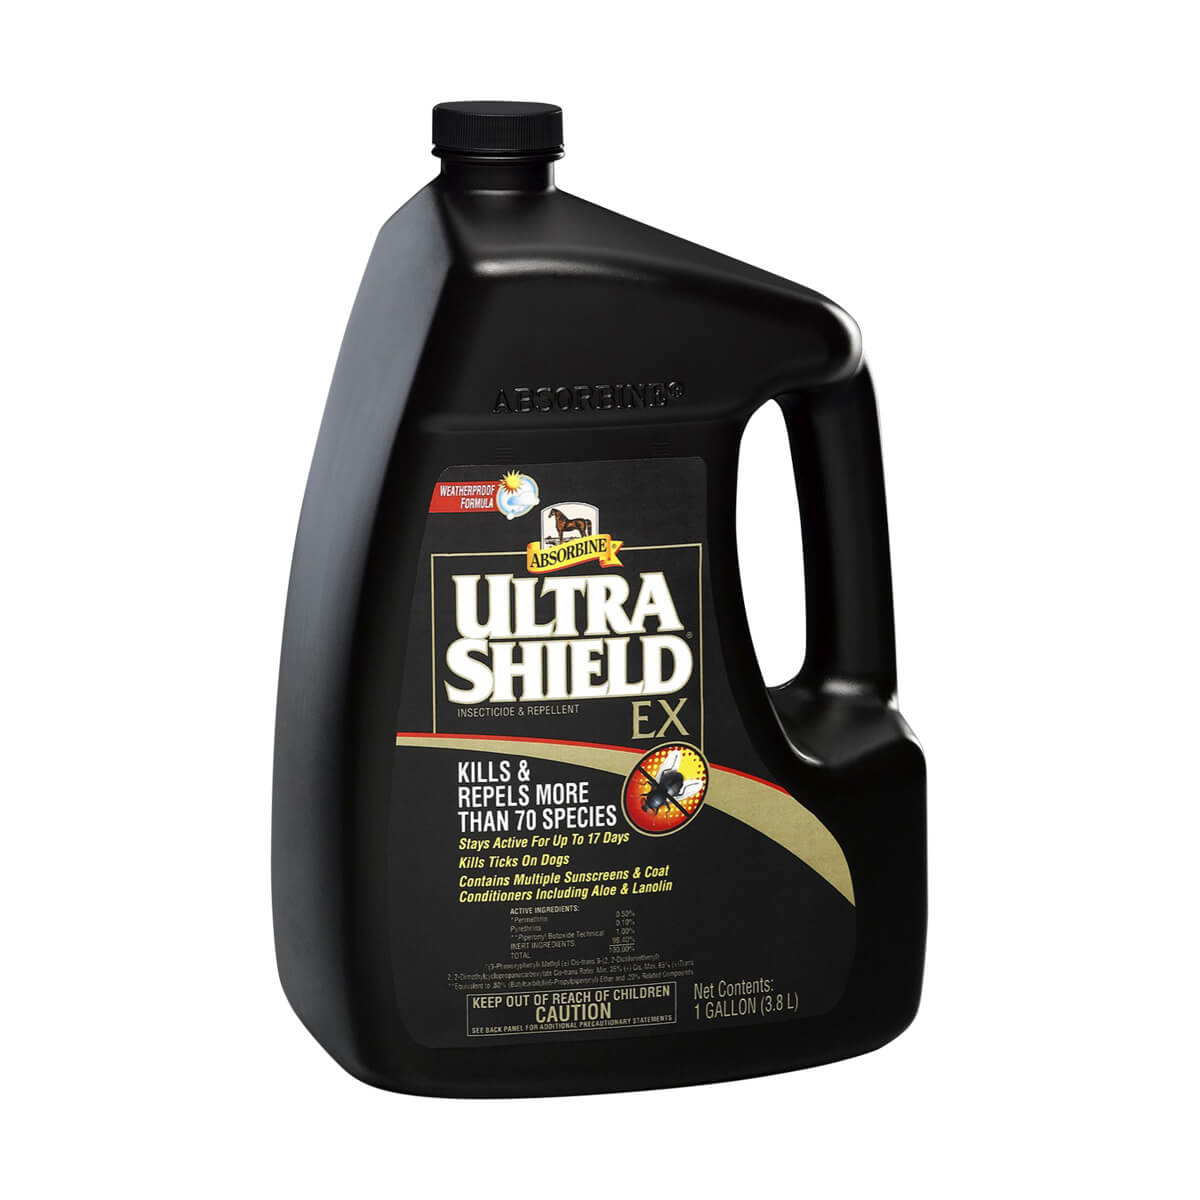 Ultra Shield Ex Insecticide and Repellent - 3.8 L